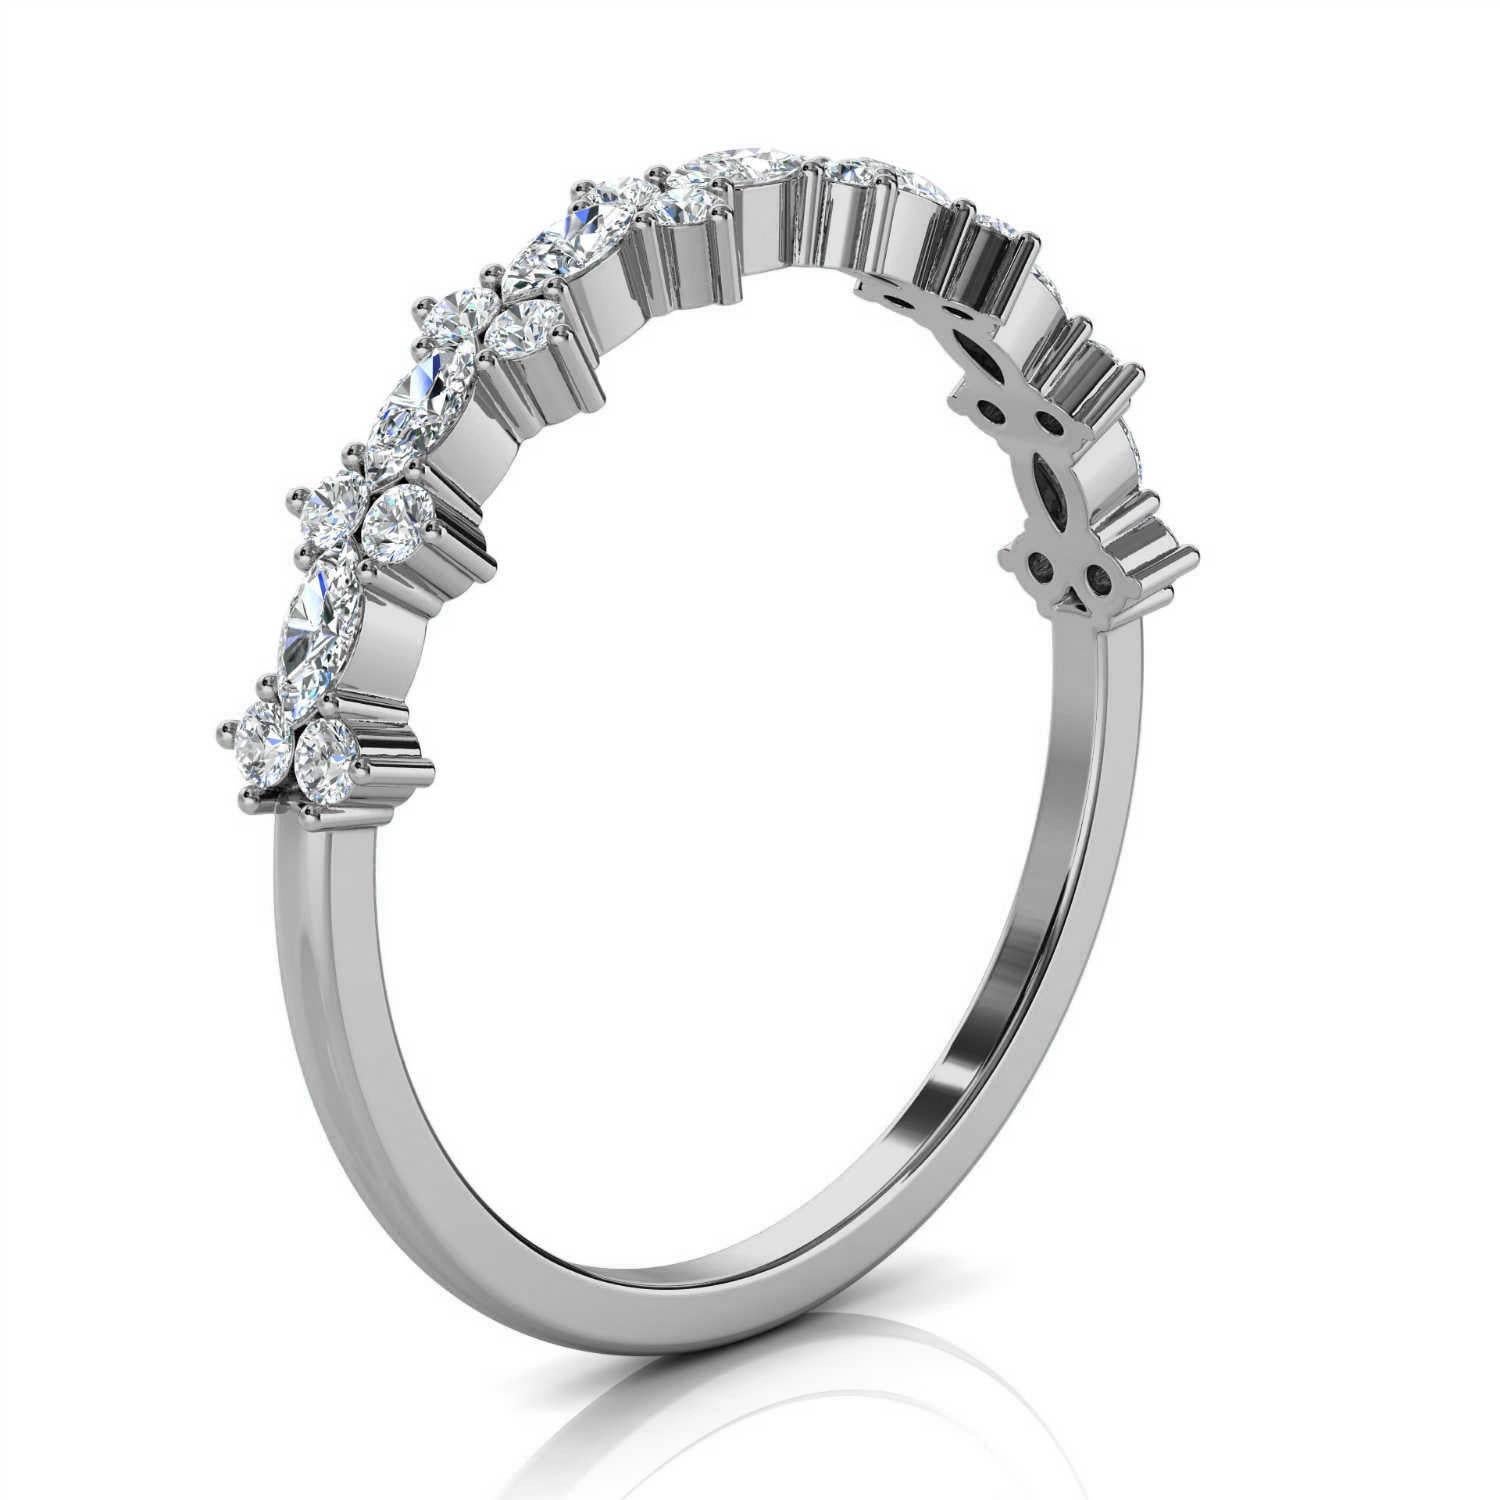 This Delicate ring features sixteen (16) Round brilliant diamonds and eight (8) Marquise shape diamonds set on a 1.2 mm wide band. This organically designed ring is sparkly and stackable. Experience the difference in person!

Product details: